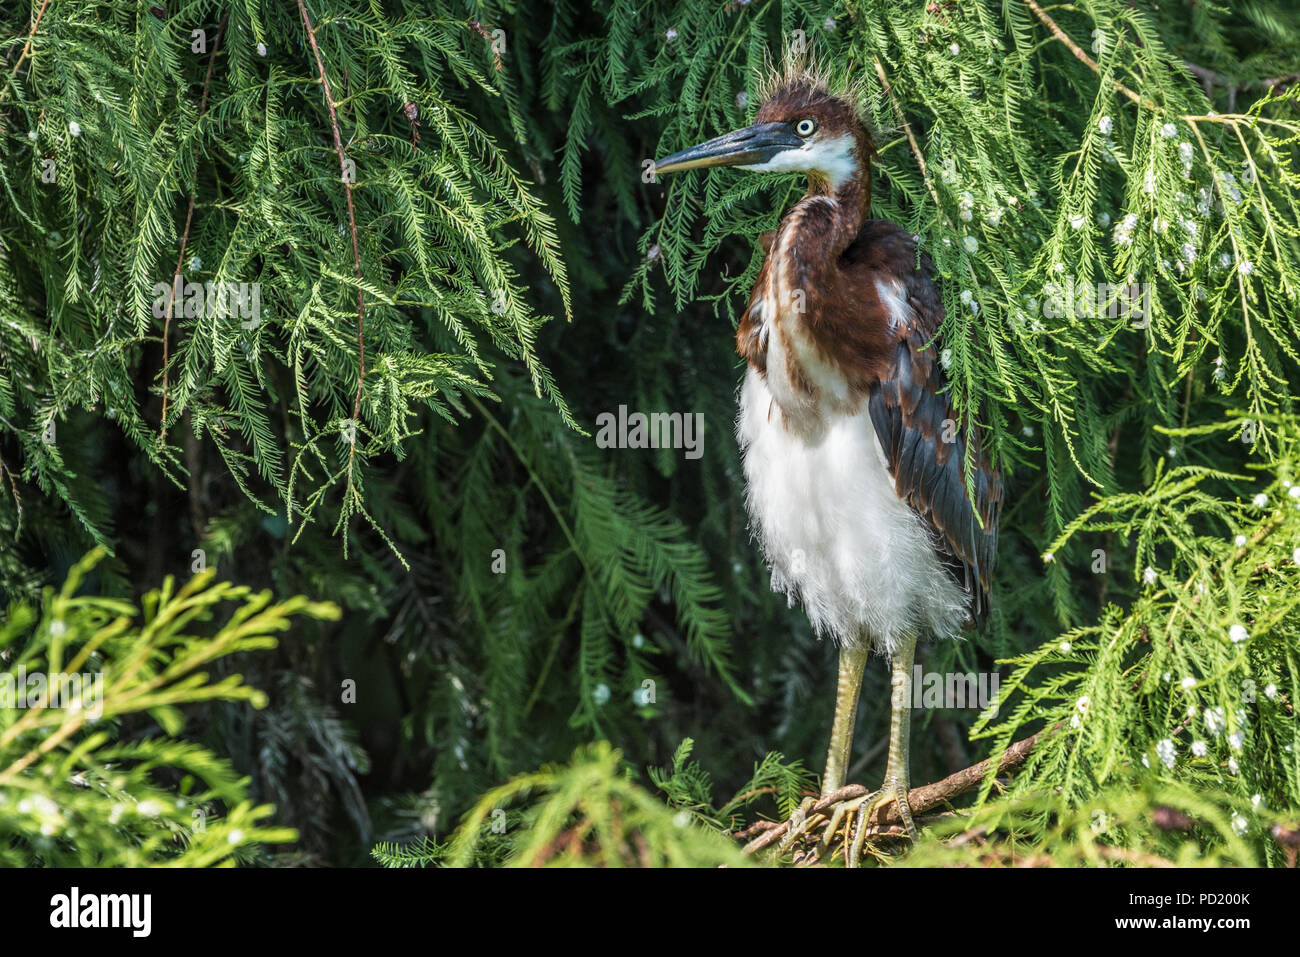 Juvenile Tricolored Heron at St. Augustine Alligator Farm Zoological Park in St. Augustine, Florida. (USA) Stock Photo